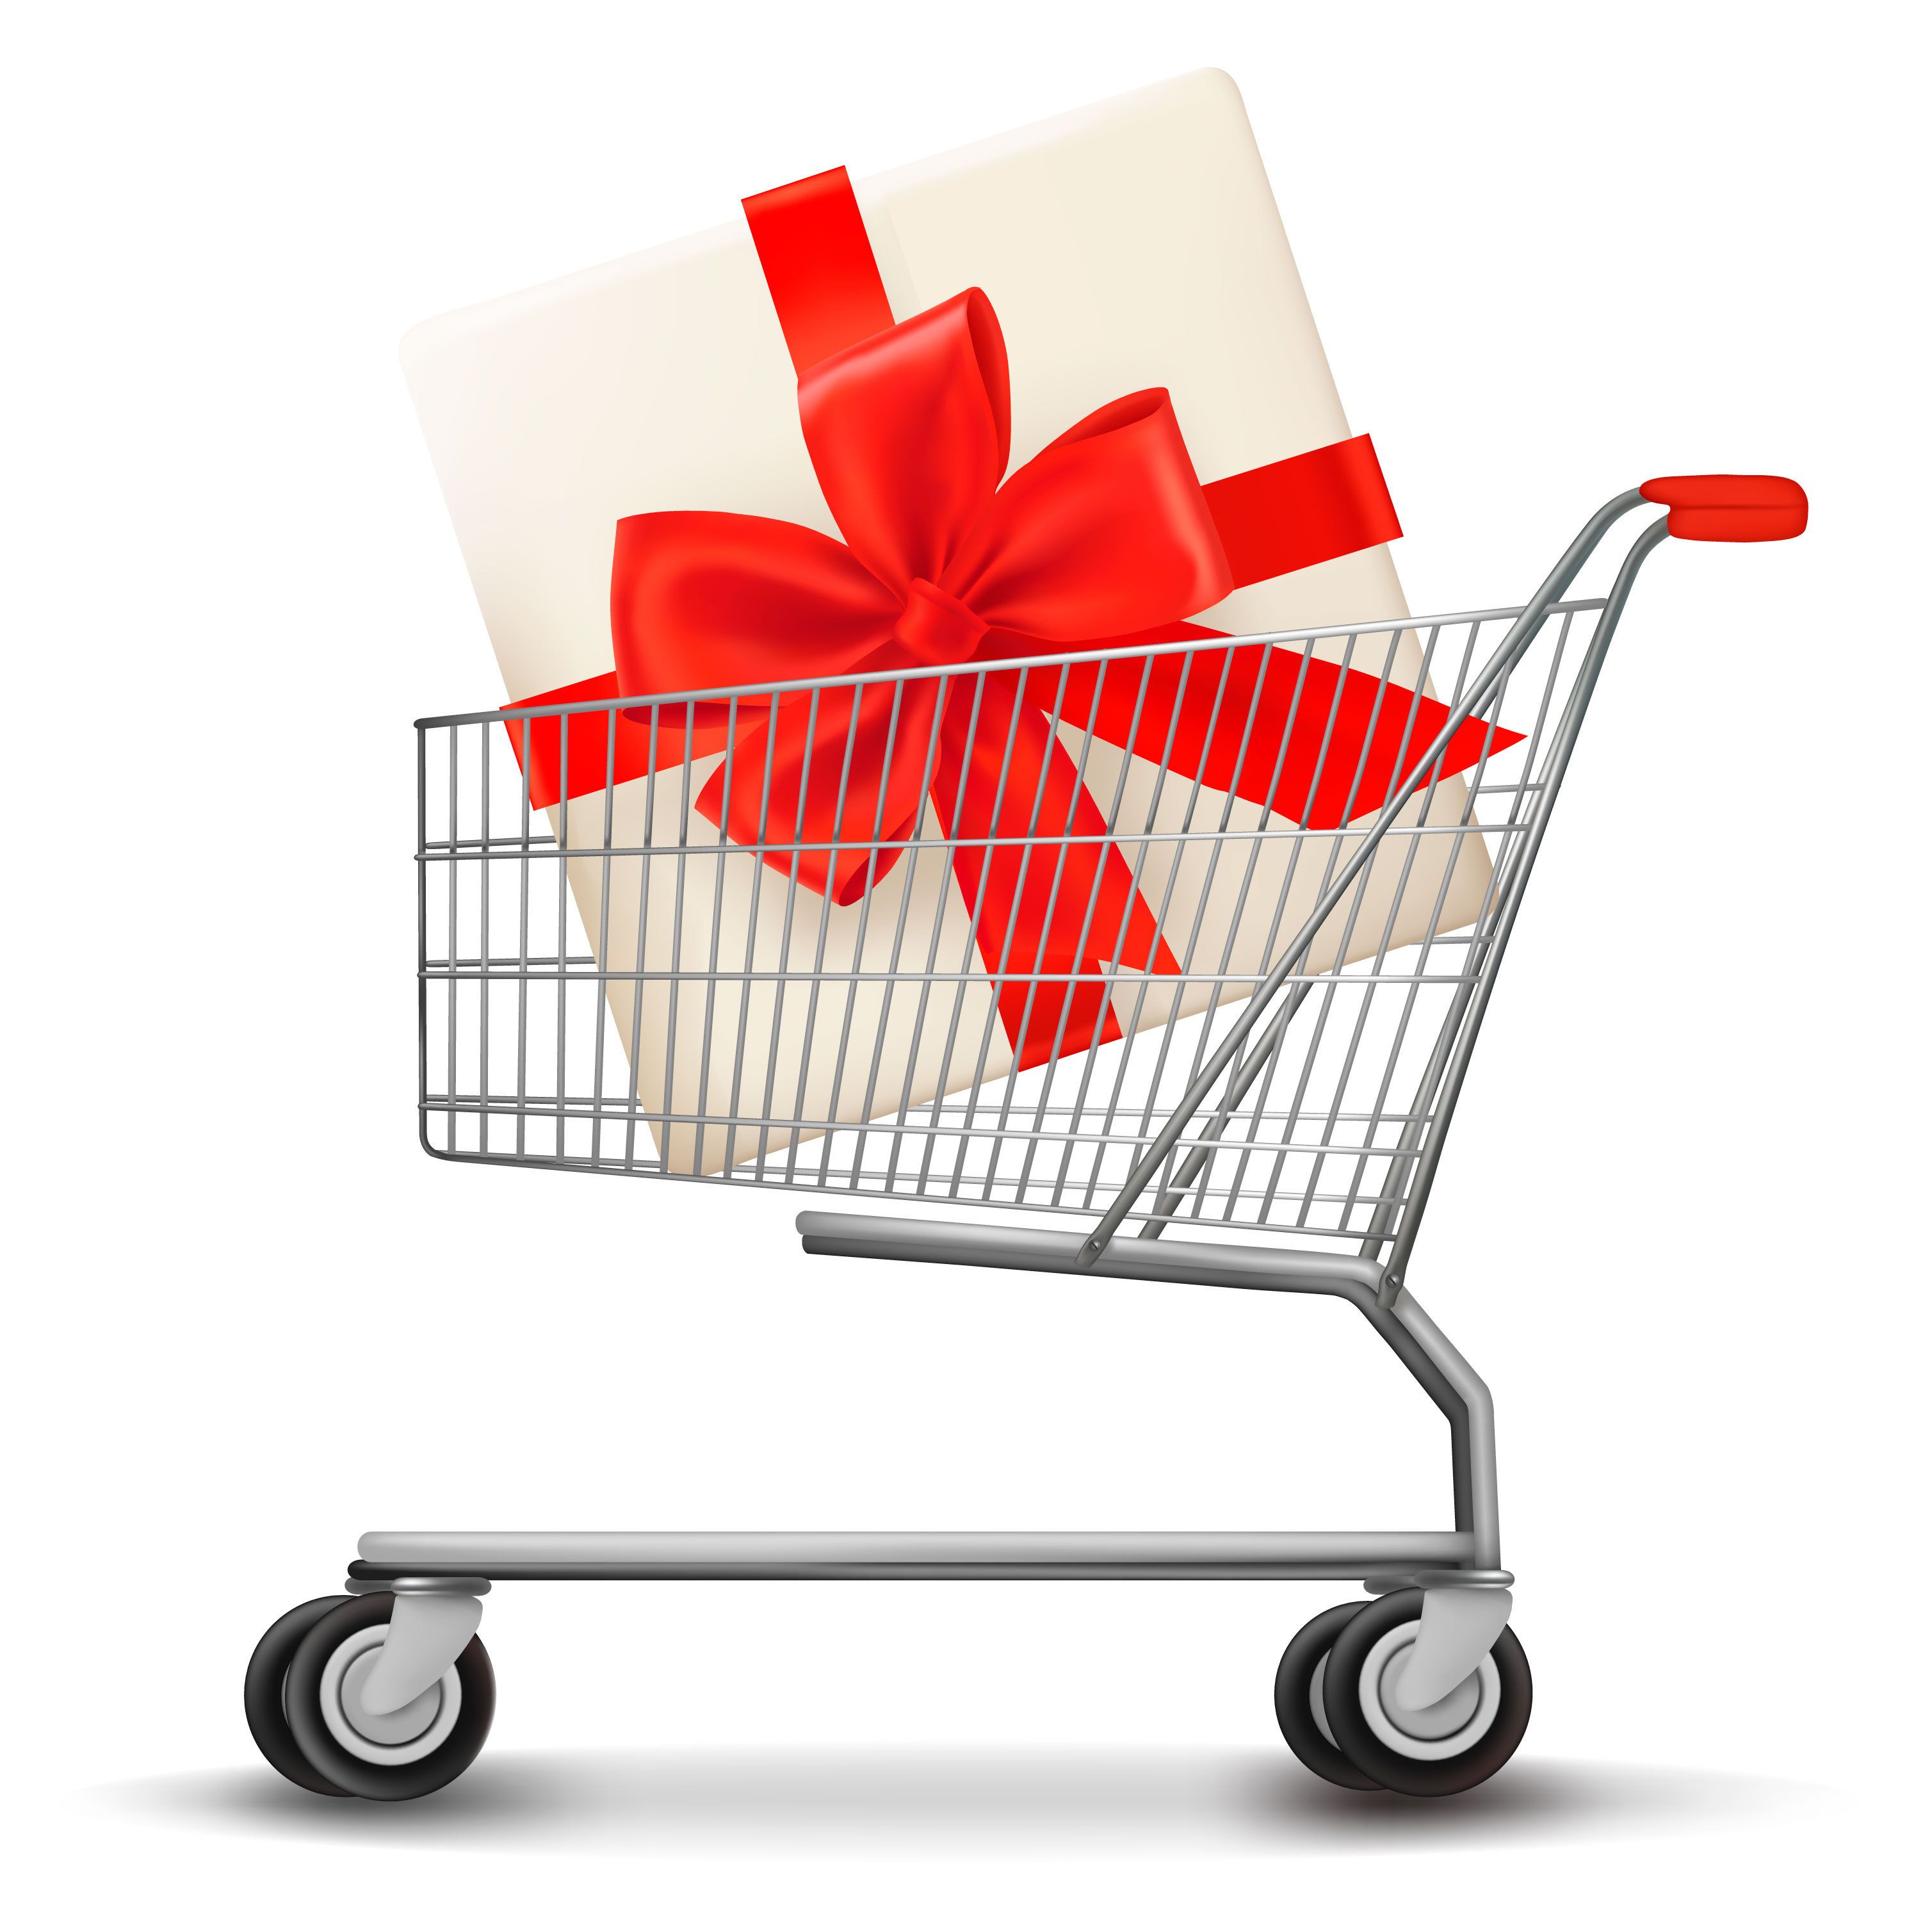 Shopping cart loaded with special deals